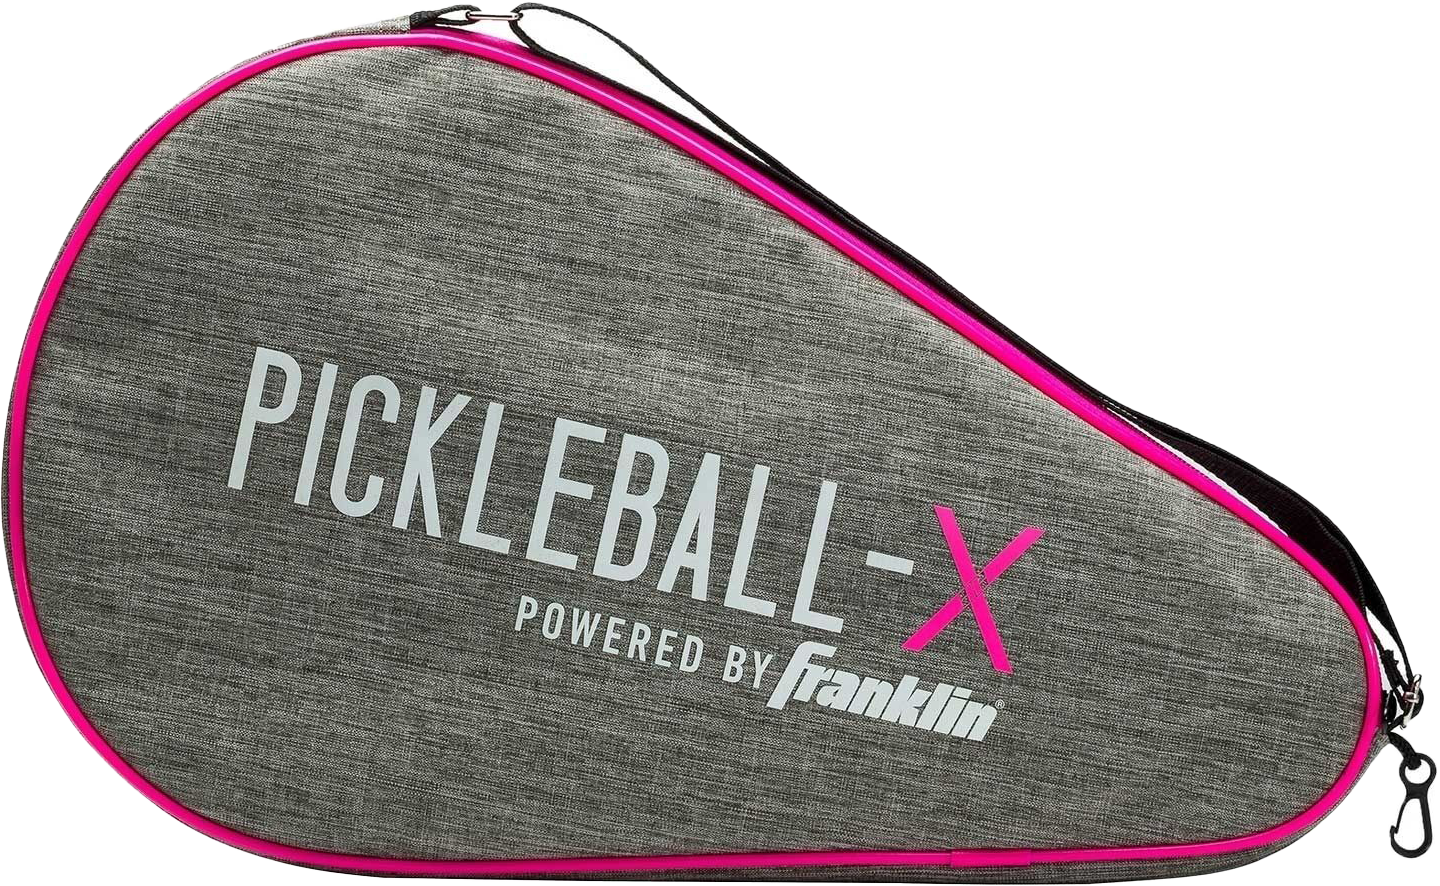 Franklin Pickleball Paddle Bag with fence hook and convenient carry strap in grey and pink.